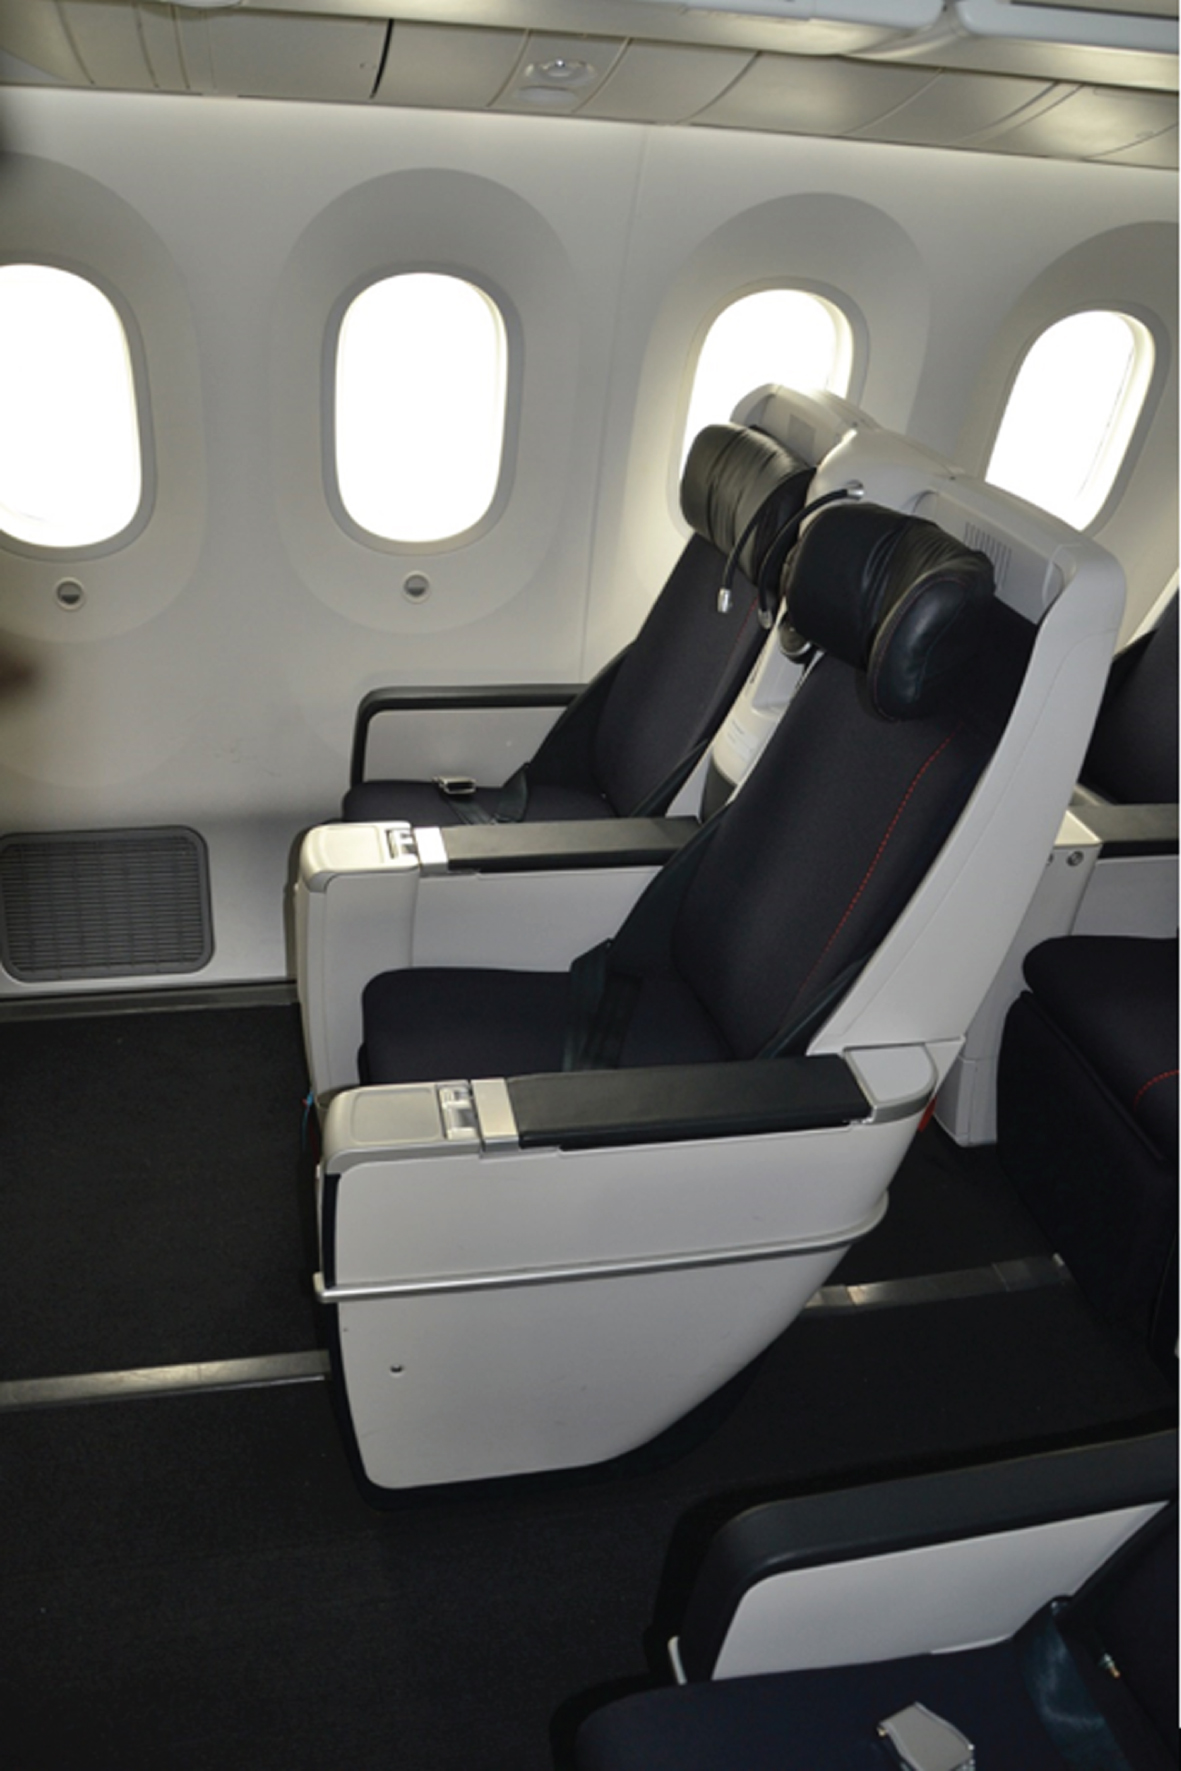 Example of a premium economy seat in a Boeing 787.